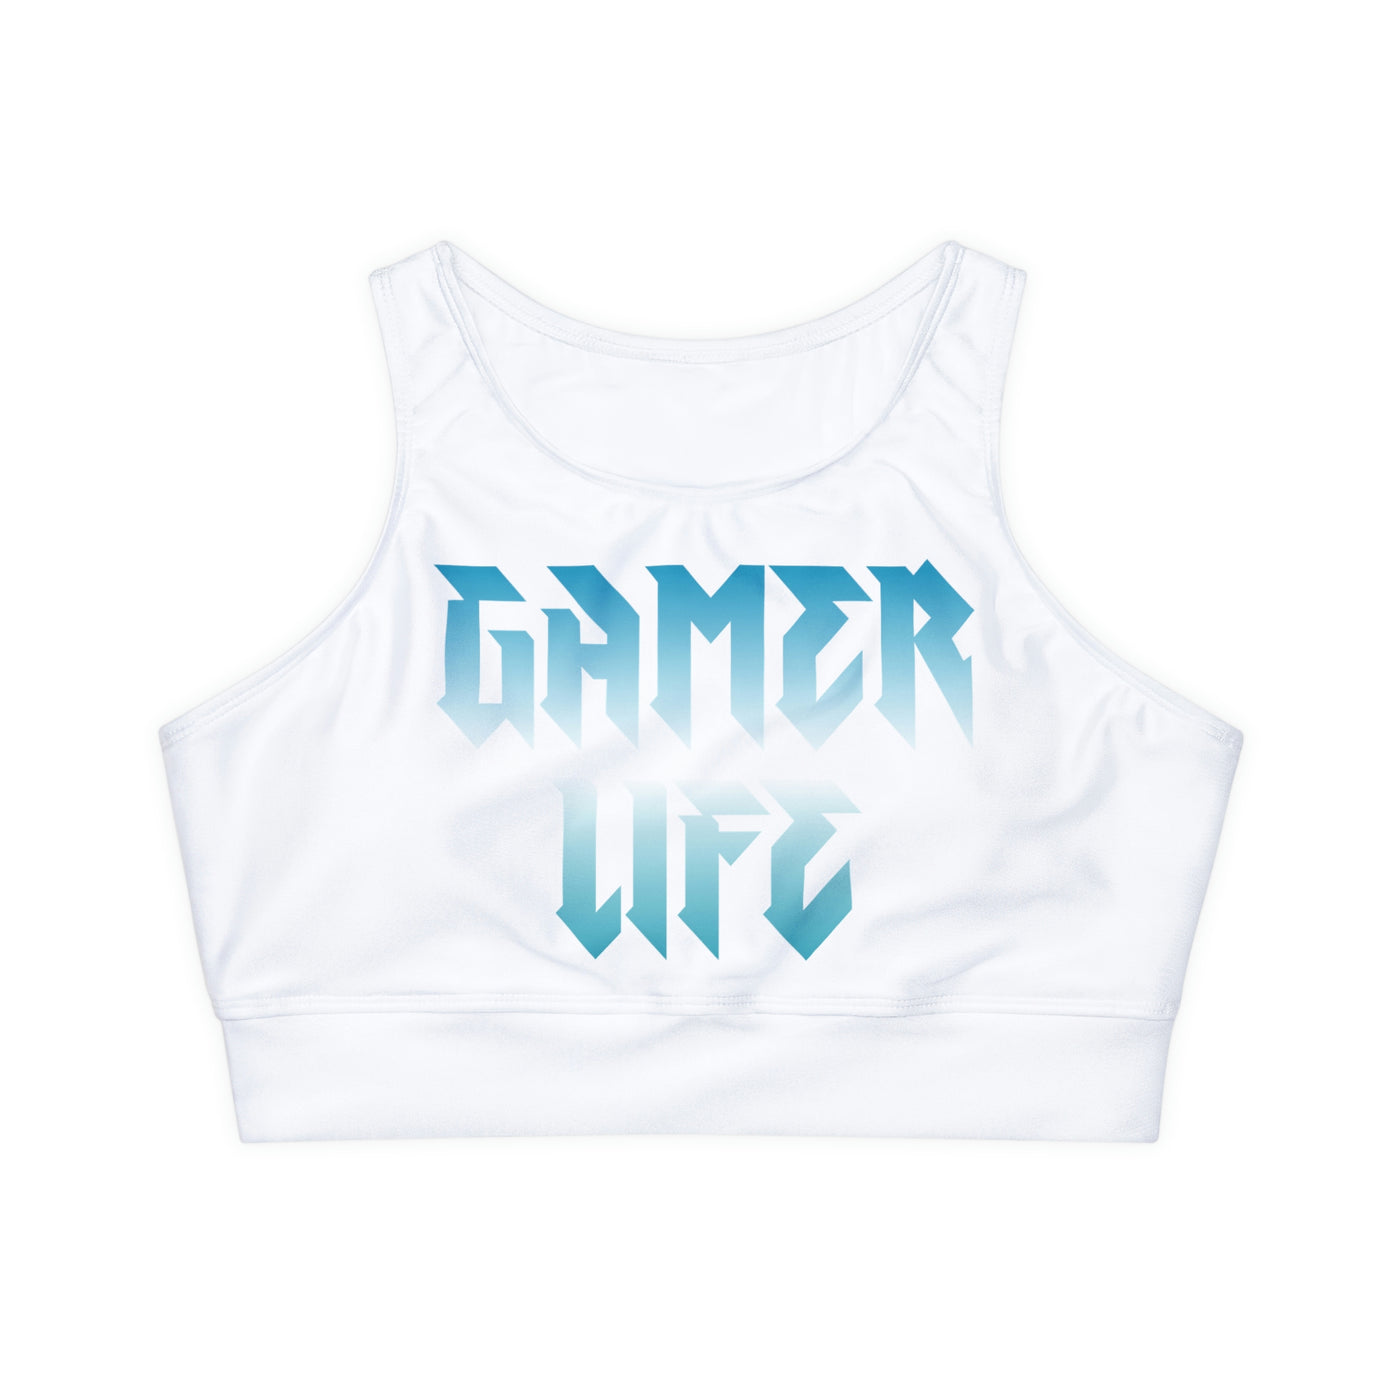 Gamer Fresh Limited Edition | Qahwah Pop | Fully Lined Padded Ladies White Sports Bra